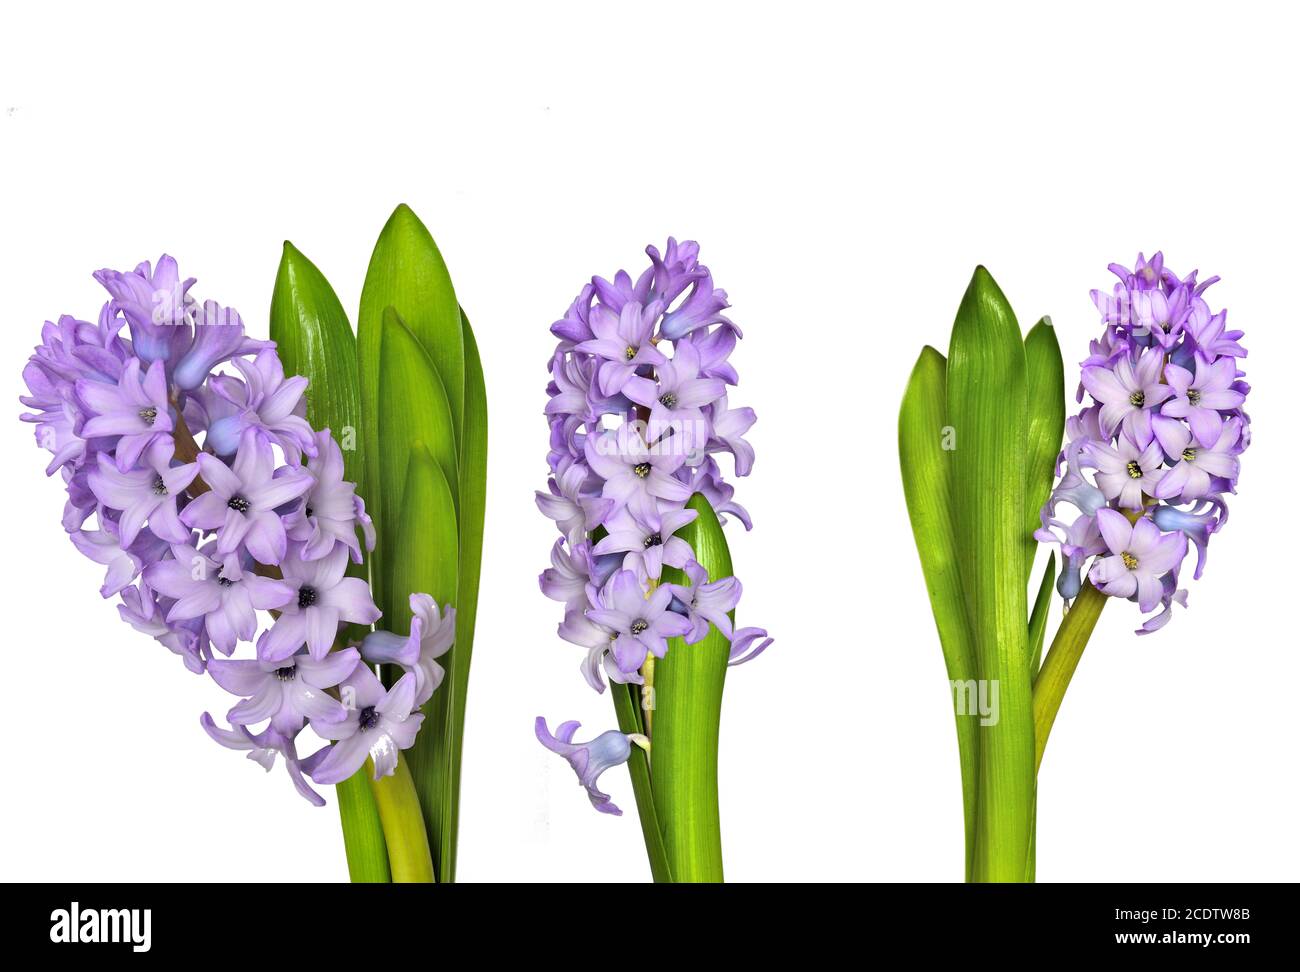 Three flowering lilac hyacinth flowers close up  on white background isolated Stock Photo